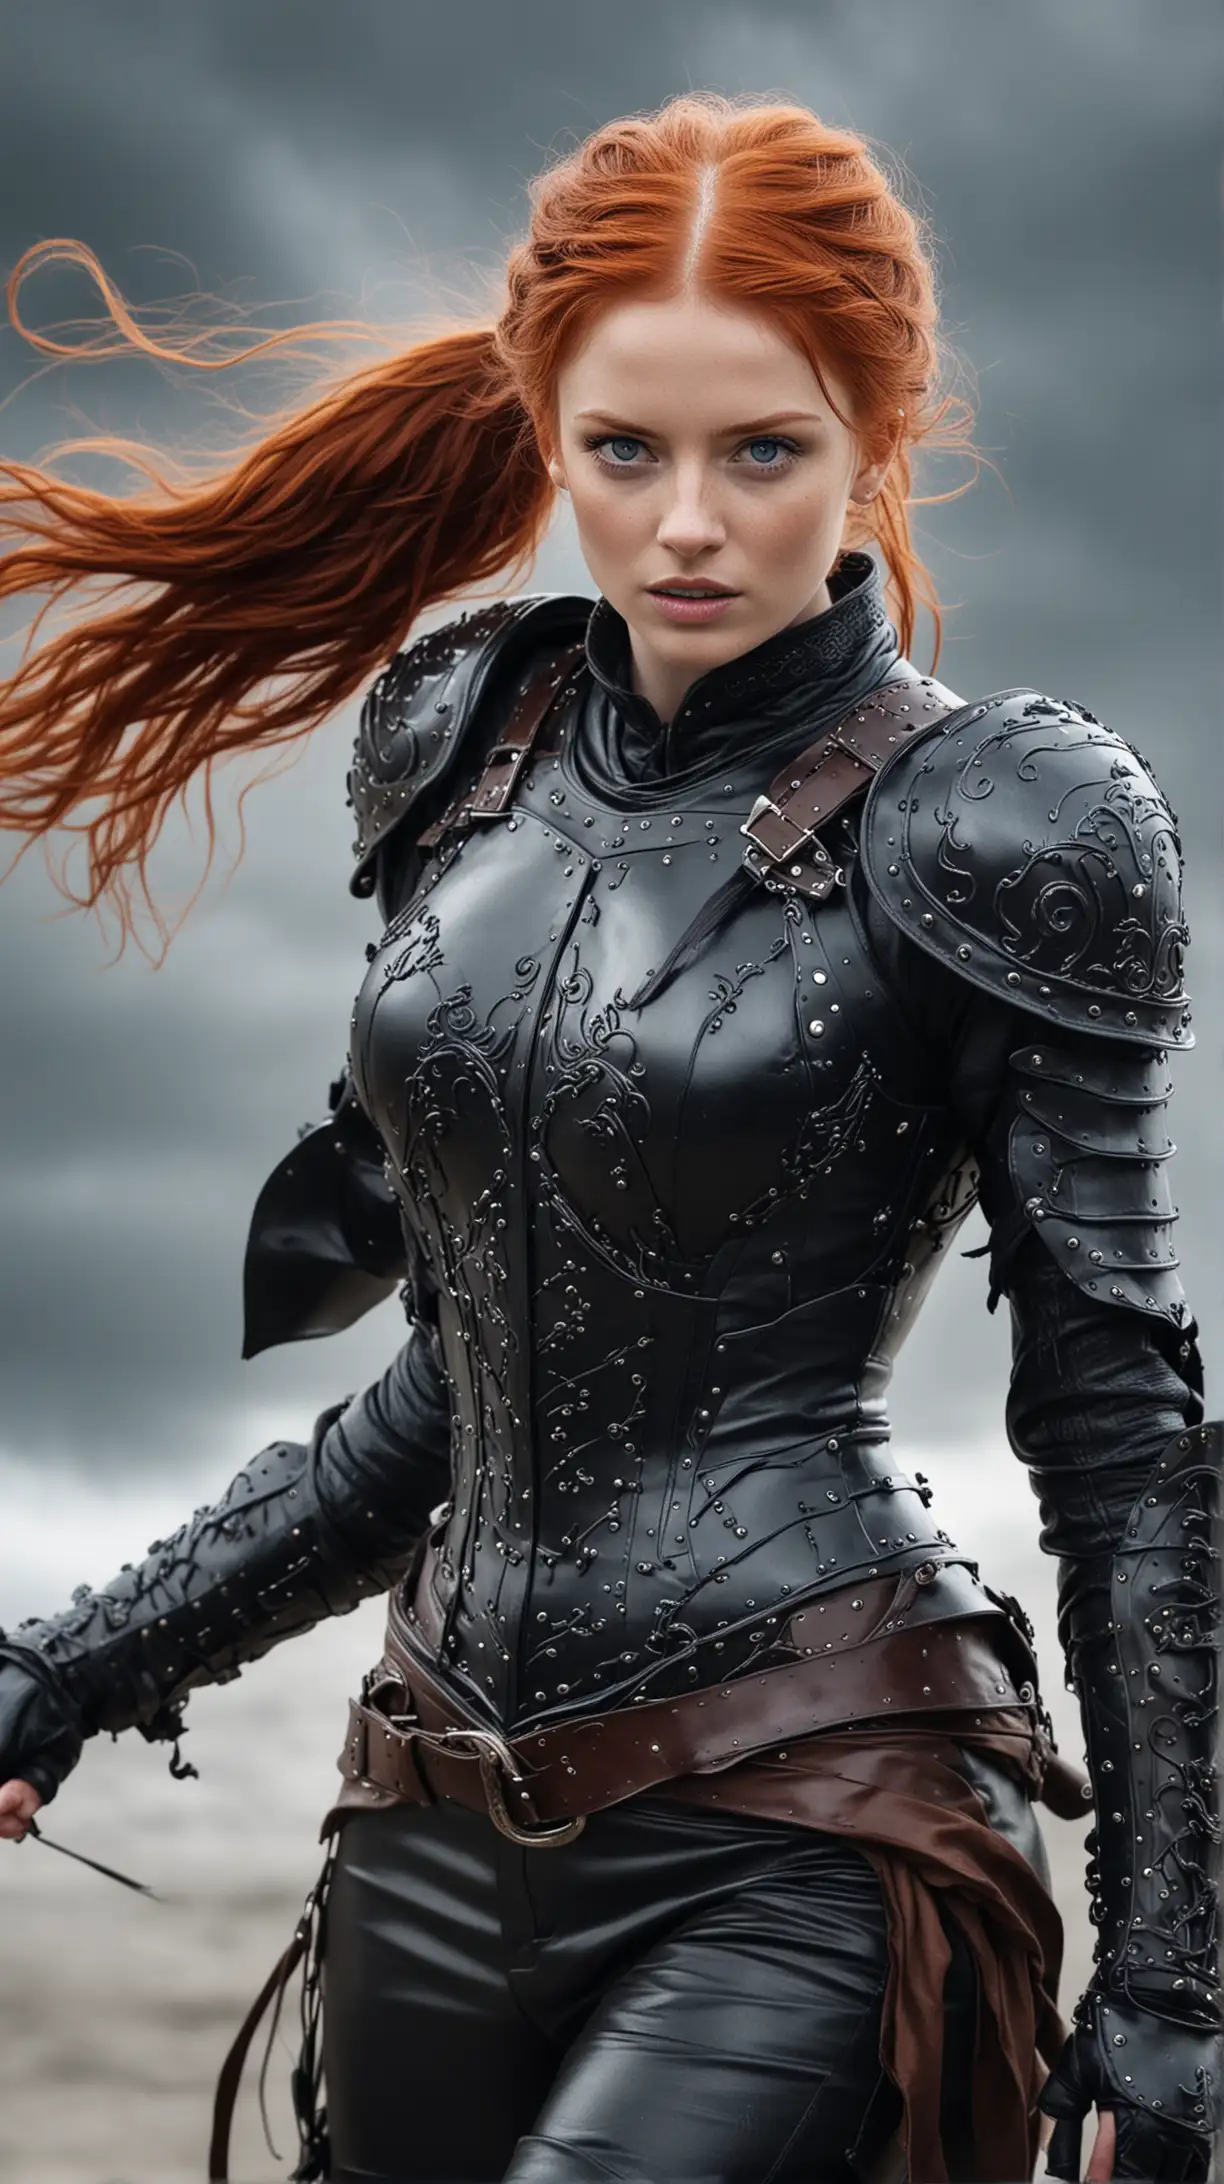 woman redhead, ponytails, blue eyes, leather armour, swirling black winds